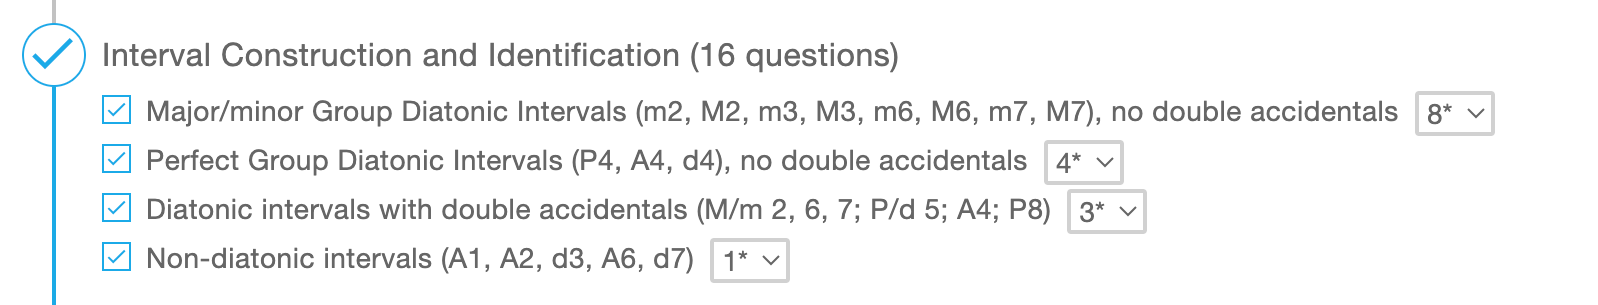 Image showing new question categories for intervals test section